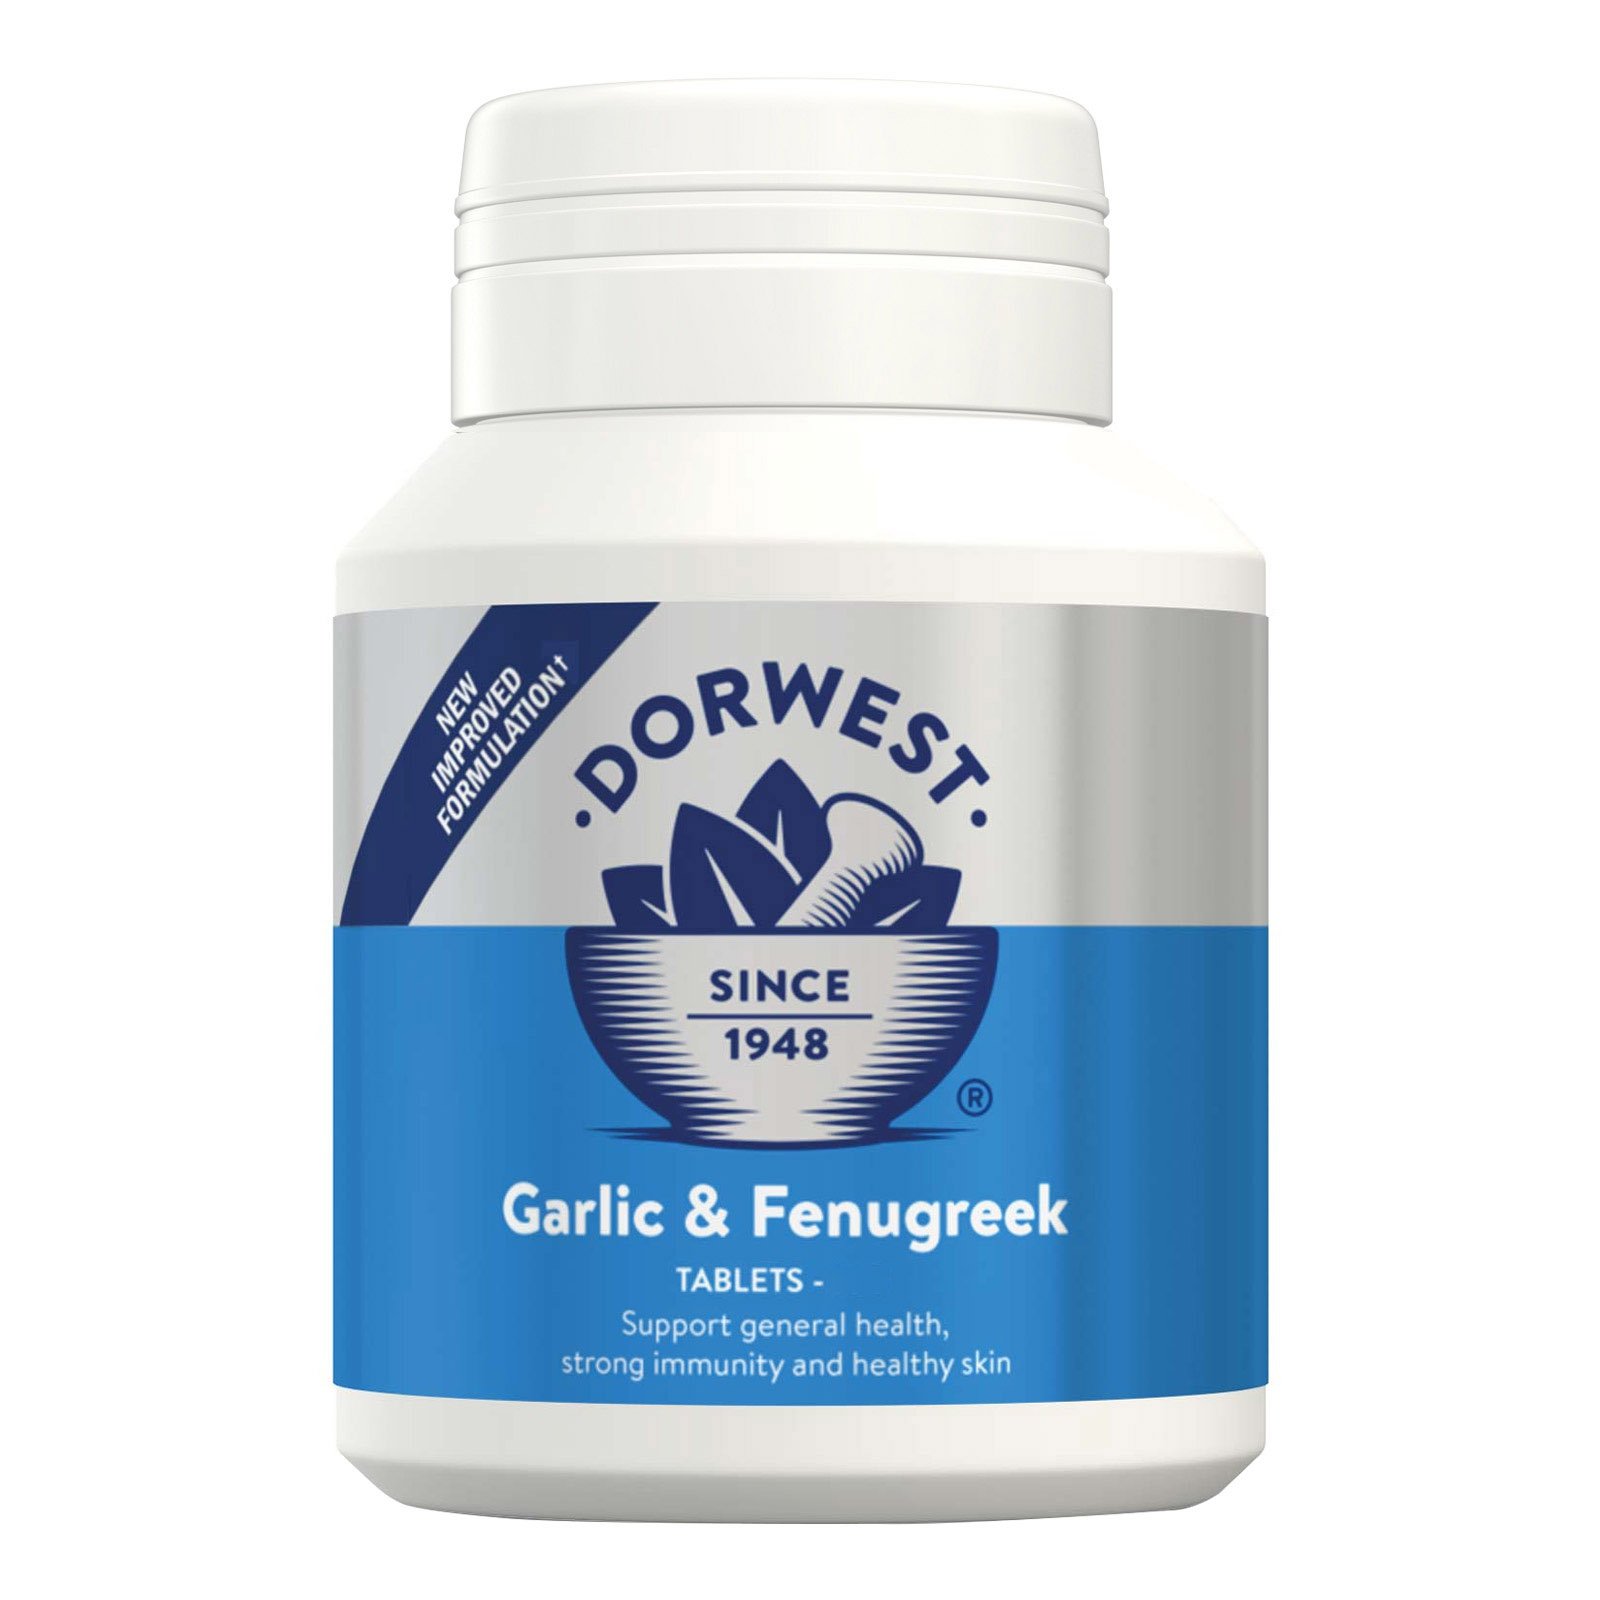 Dorwest Garlic & Fenugreek Tablets for Dogs for Dogs & Cats